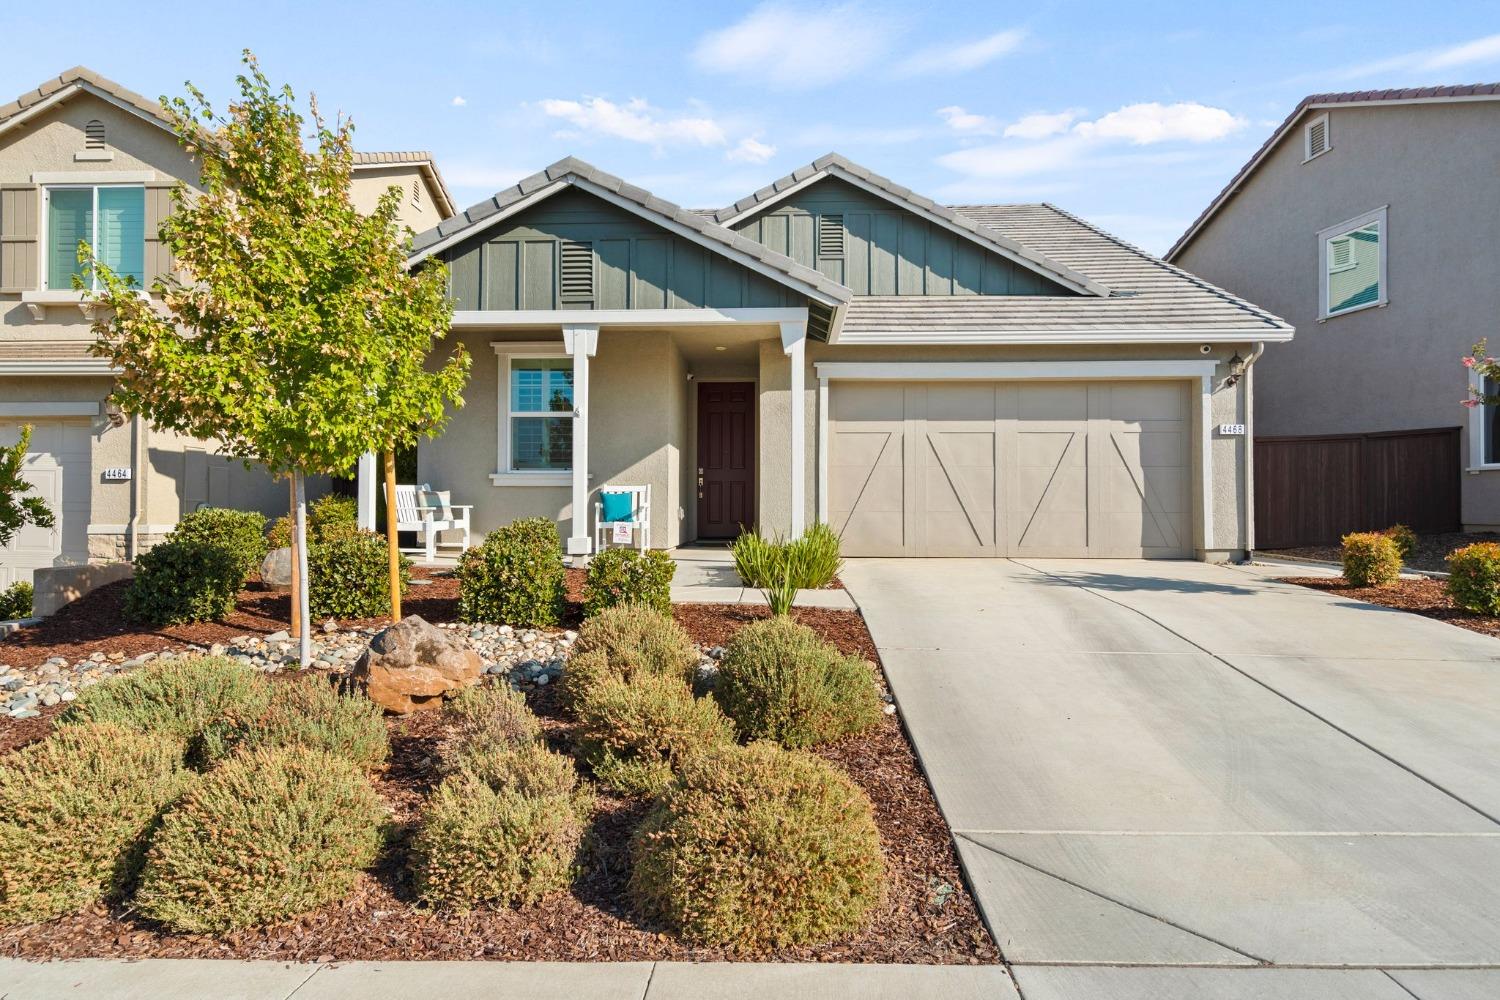 Welcome to your dream home in Folsom Ranch! This 2020-built single-family residence offers 2,335 sq.